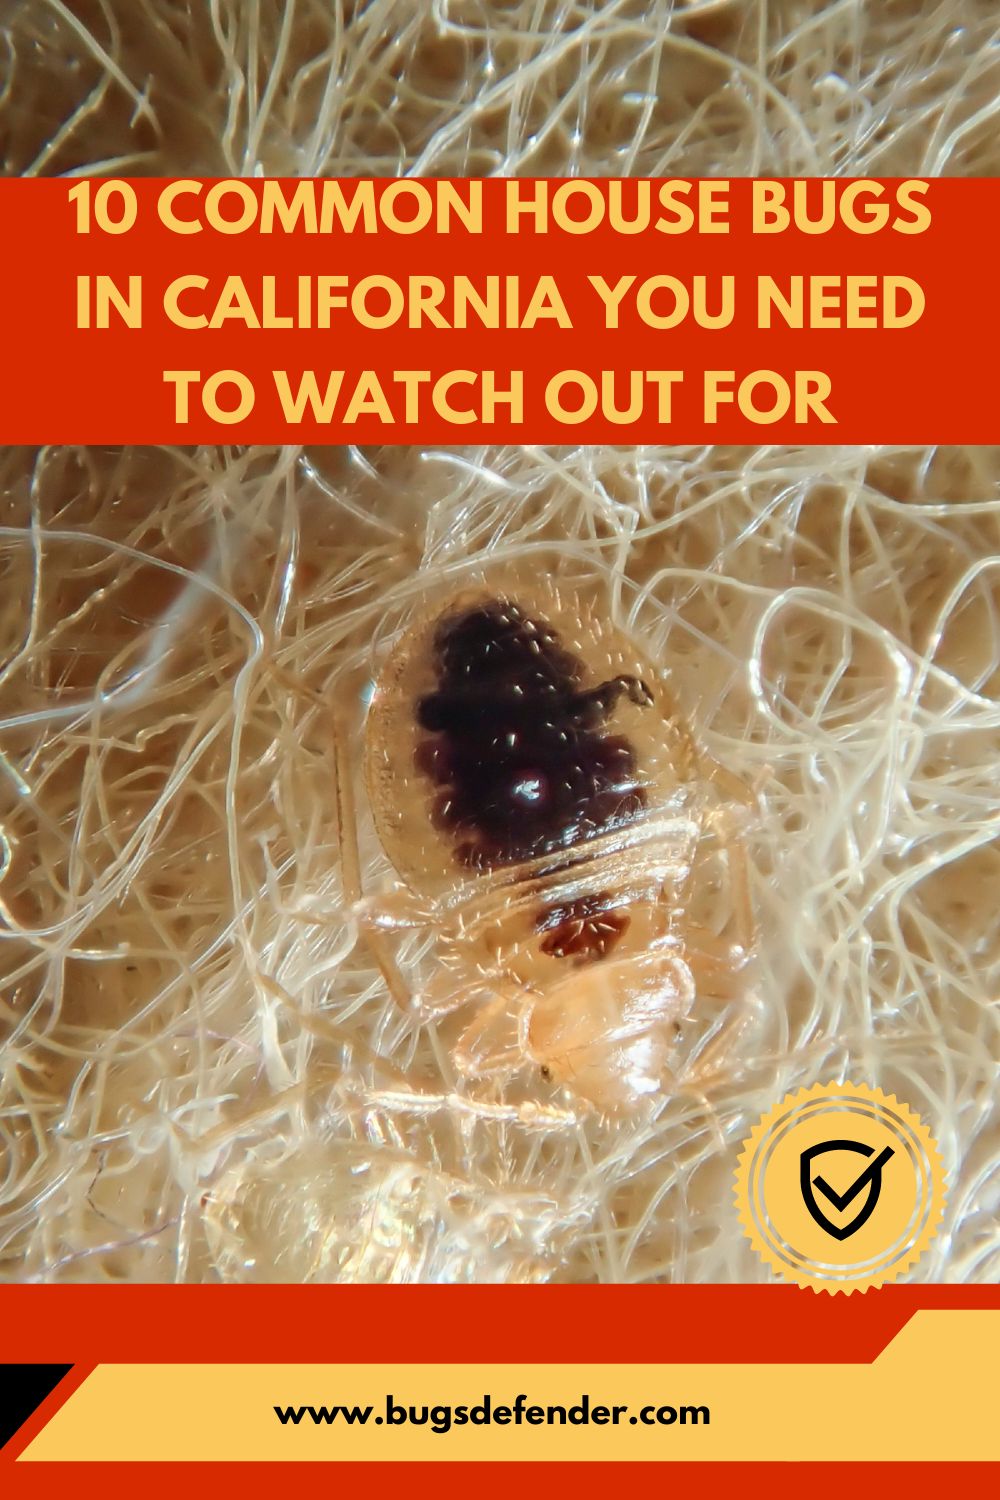 10 Common House Bugs In California You Need To Watch Out For pin 2